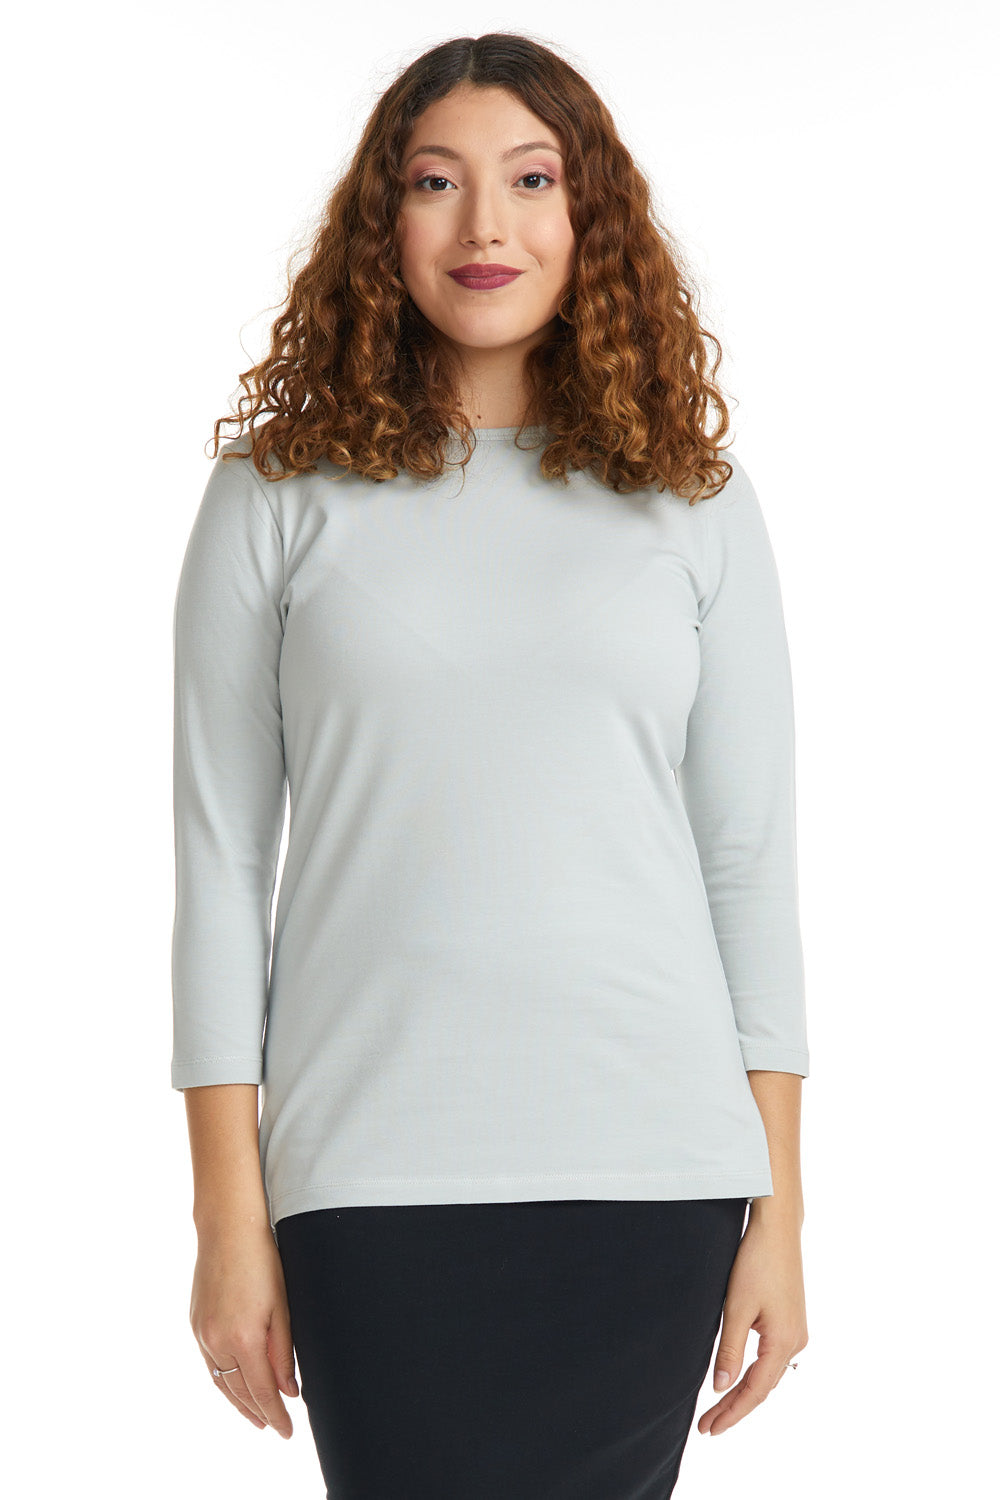 3/4 Sleeve Relaxed Fit Crewneck T-Shirt for Women - POLAR GREY